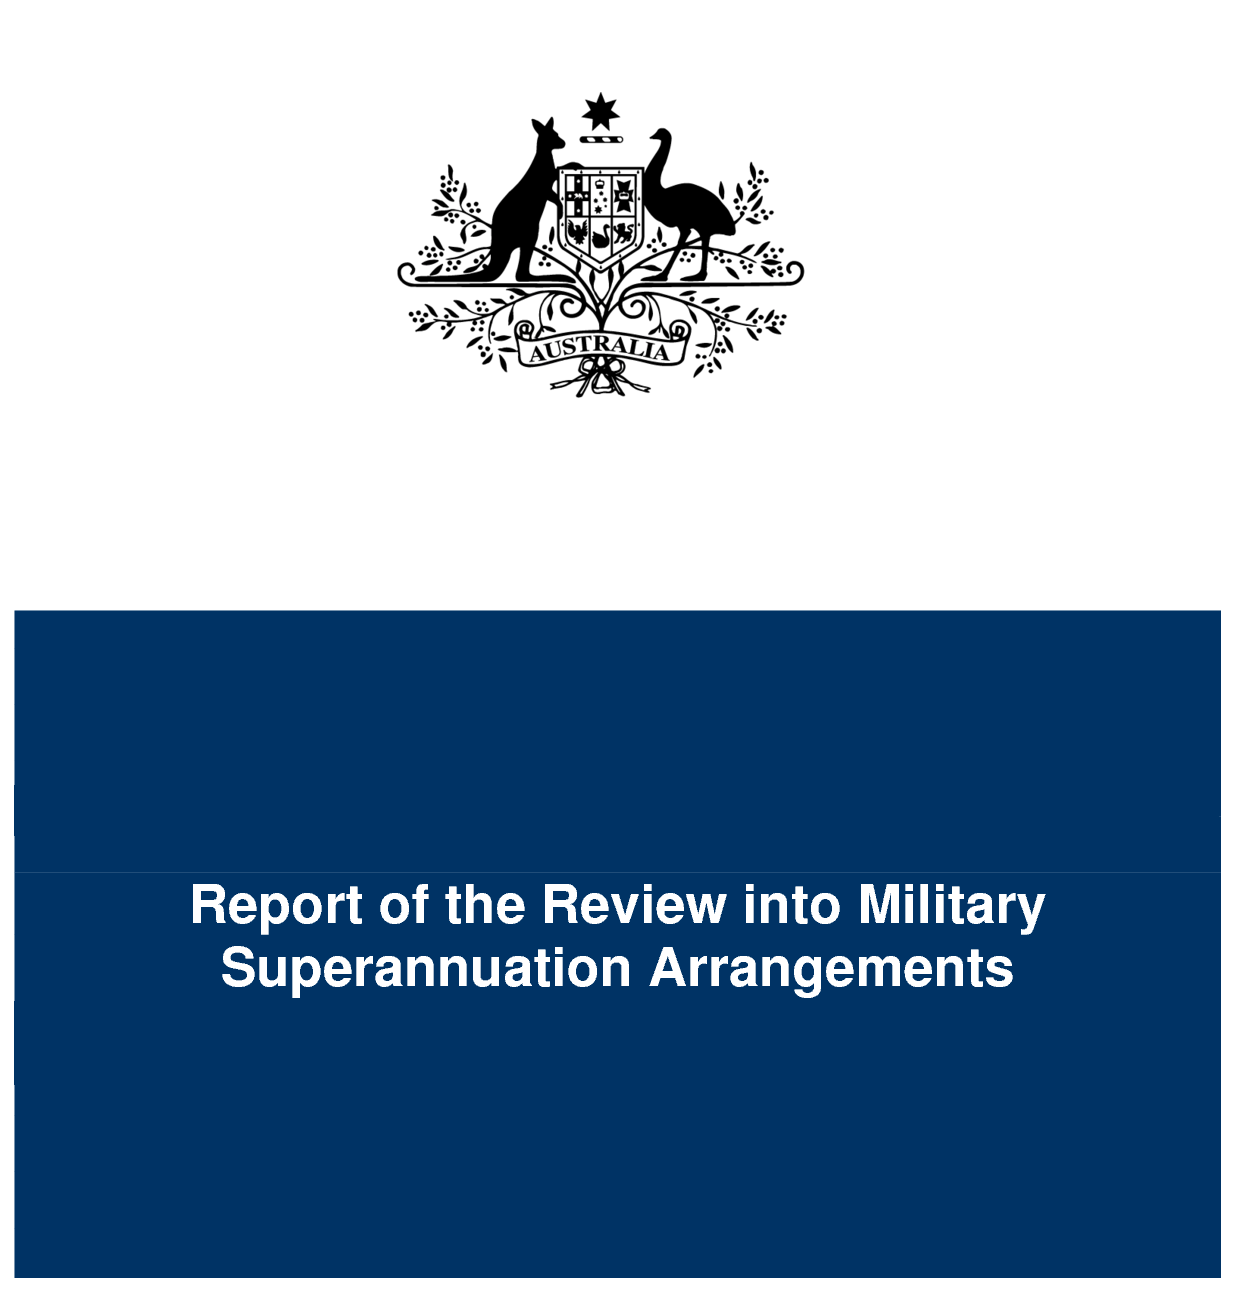 Report on Military Super